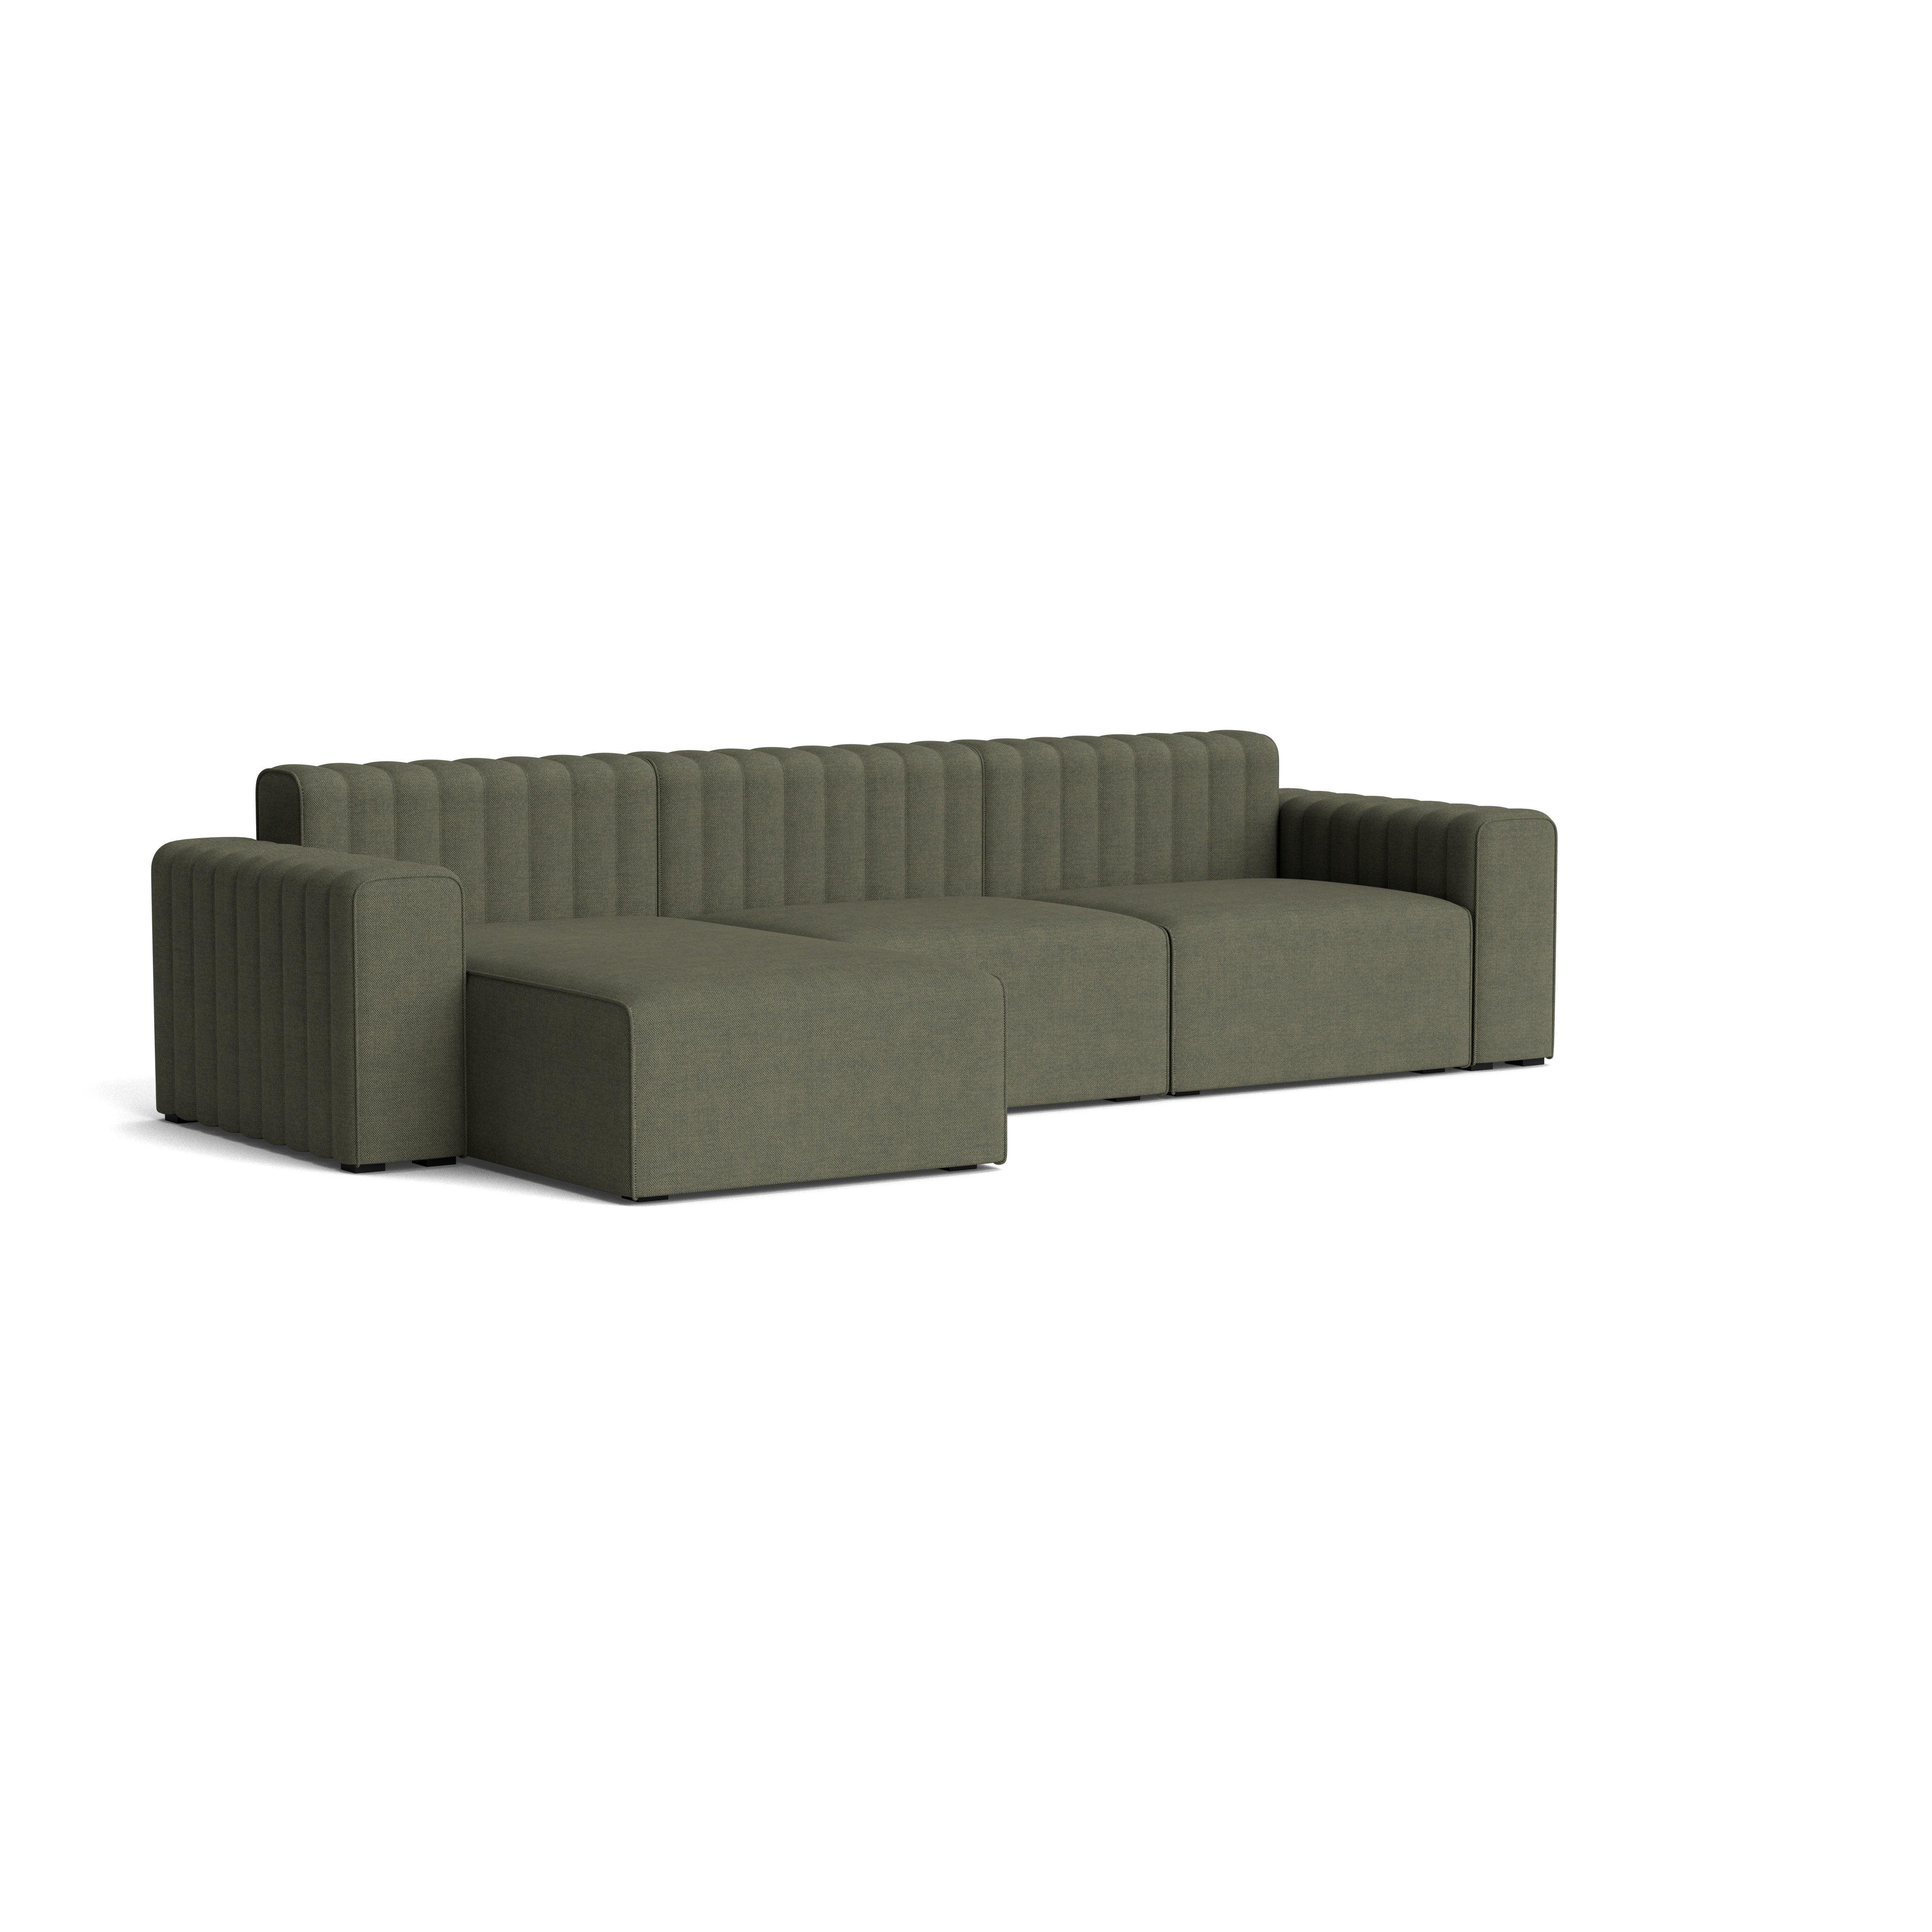 RIFF Sofa, Three Seater with Chaise Lounge Right (Left Arm, Center, Chaise Longue Right) - Fiord - 961 - PARIS14A.RO